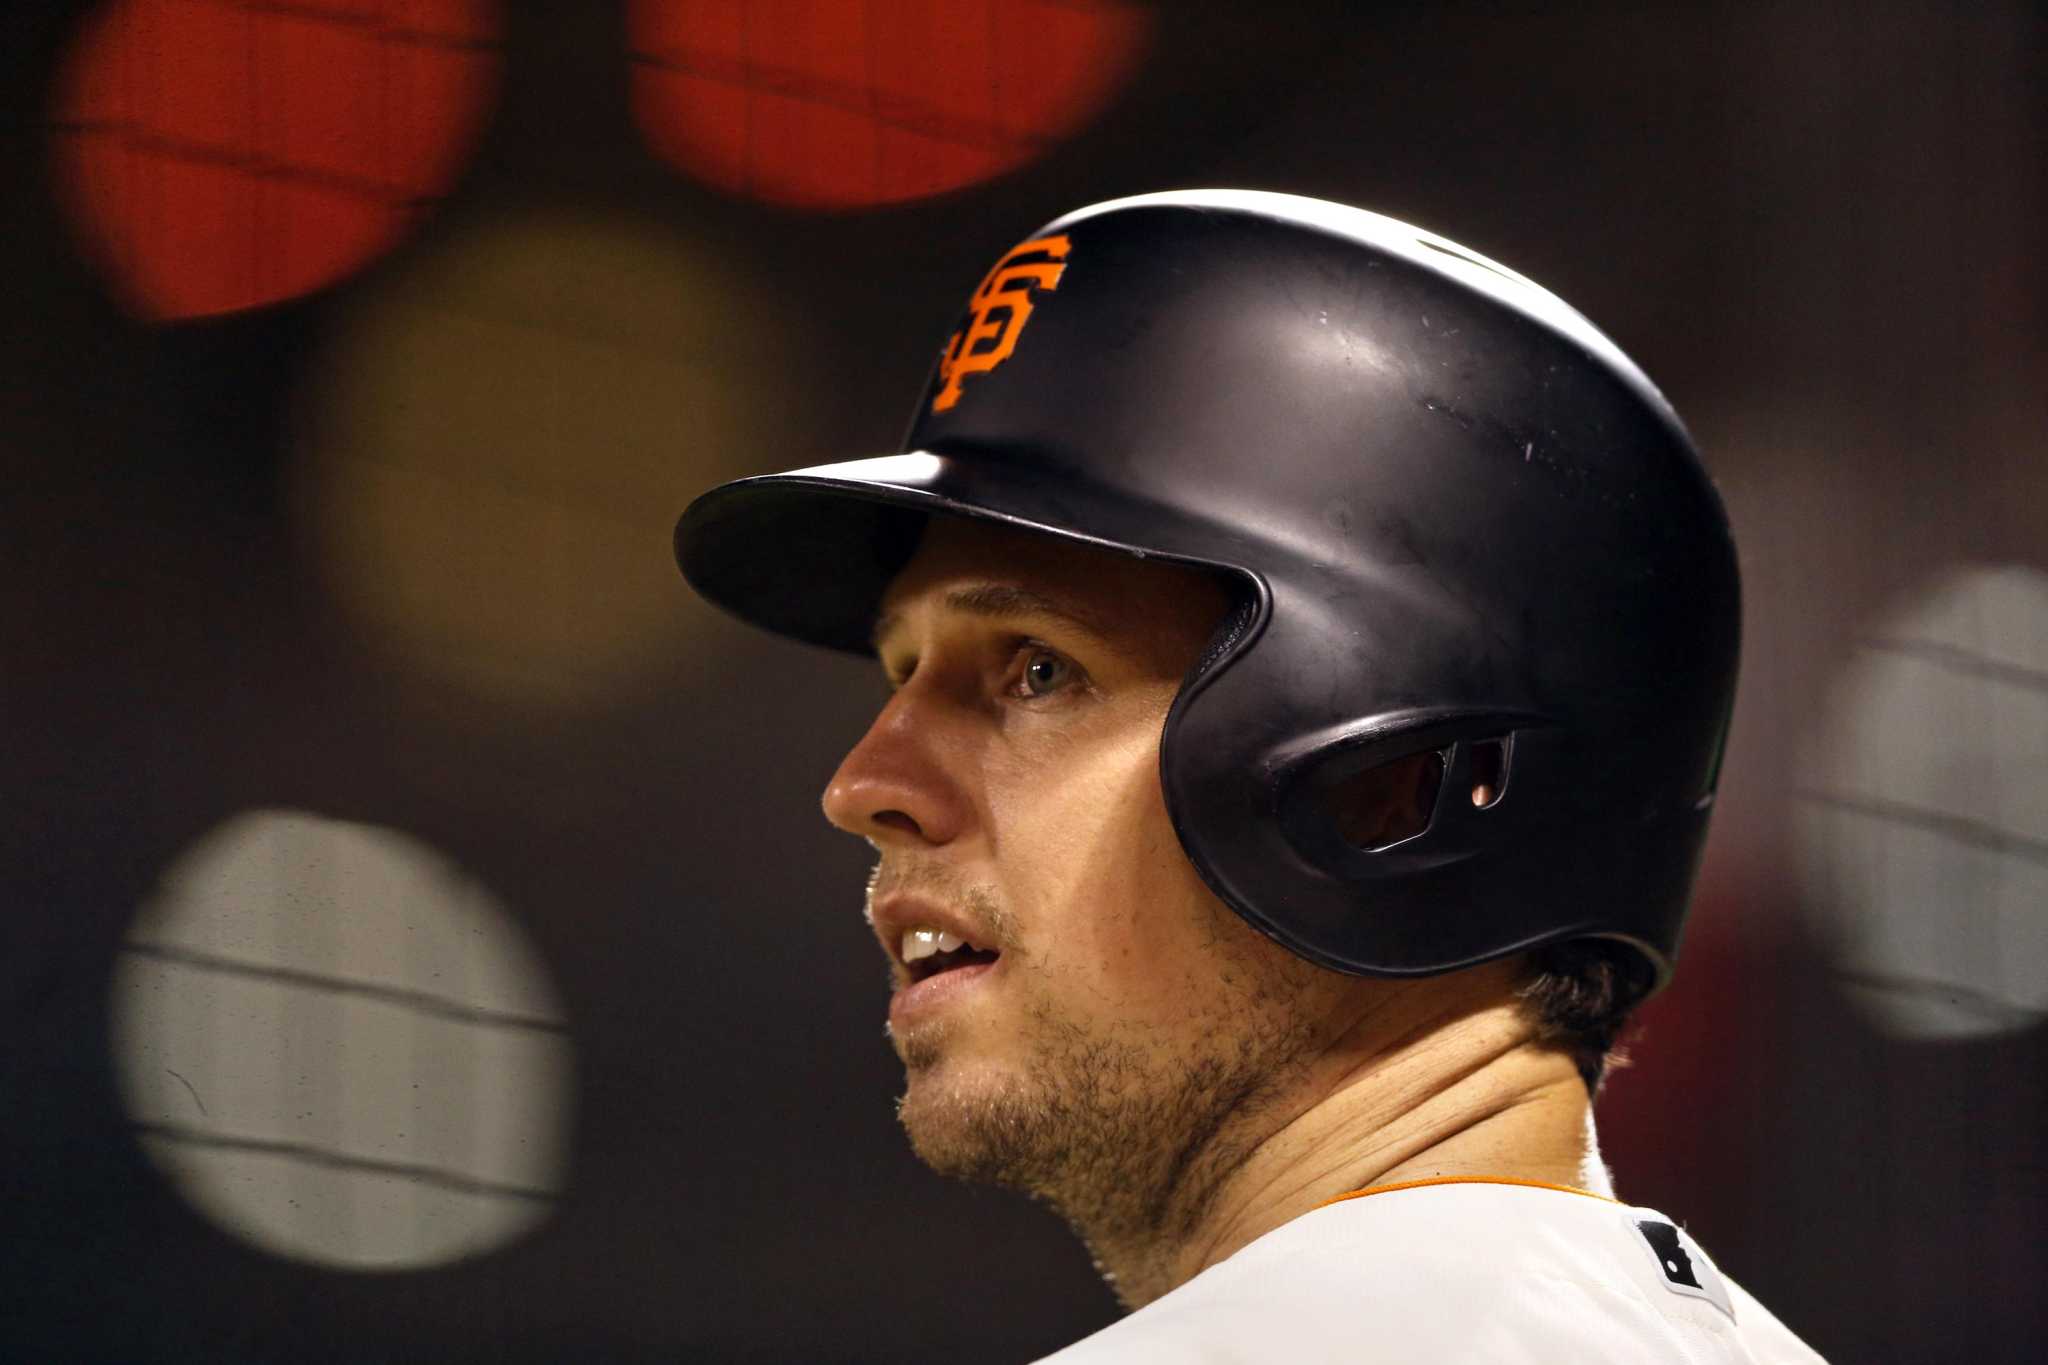 Scary but successful: Giants win home opener, Buster Posey tells